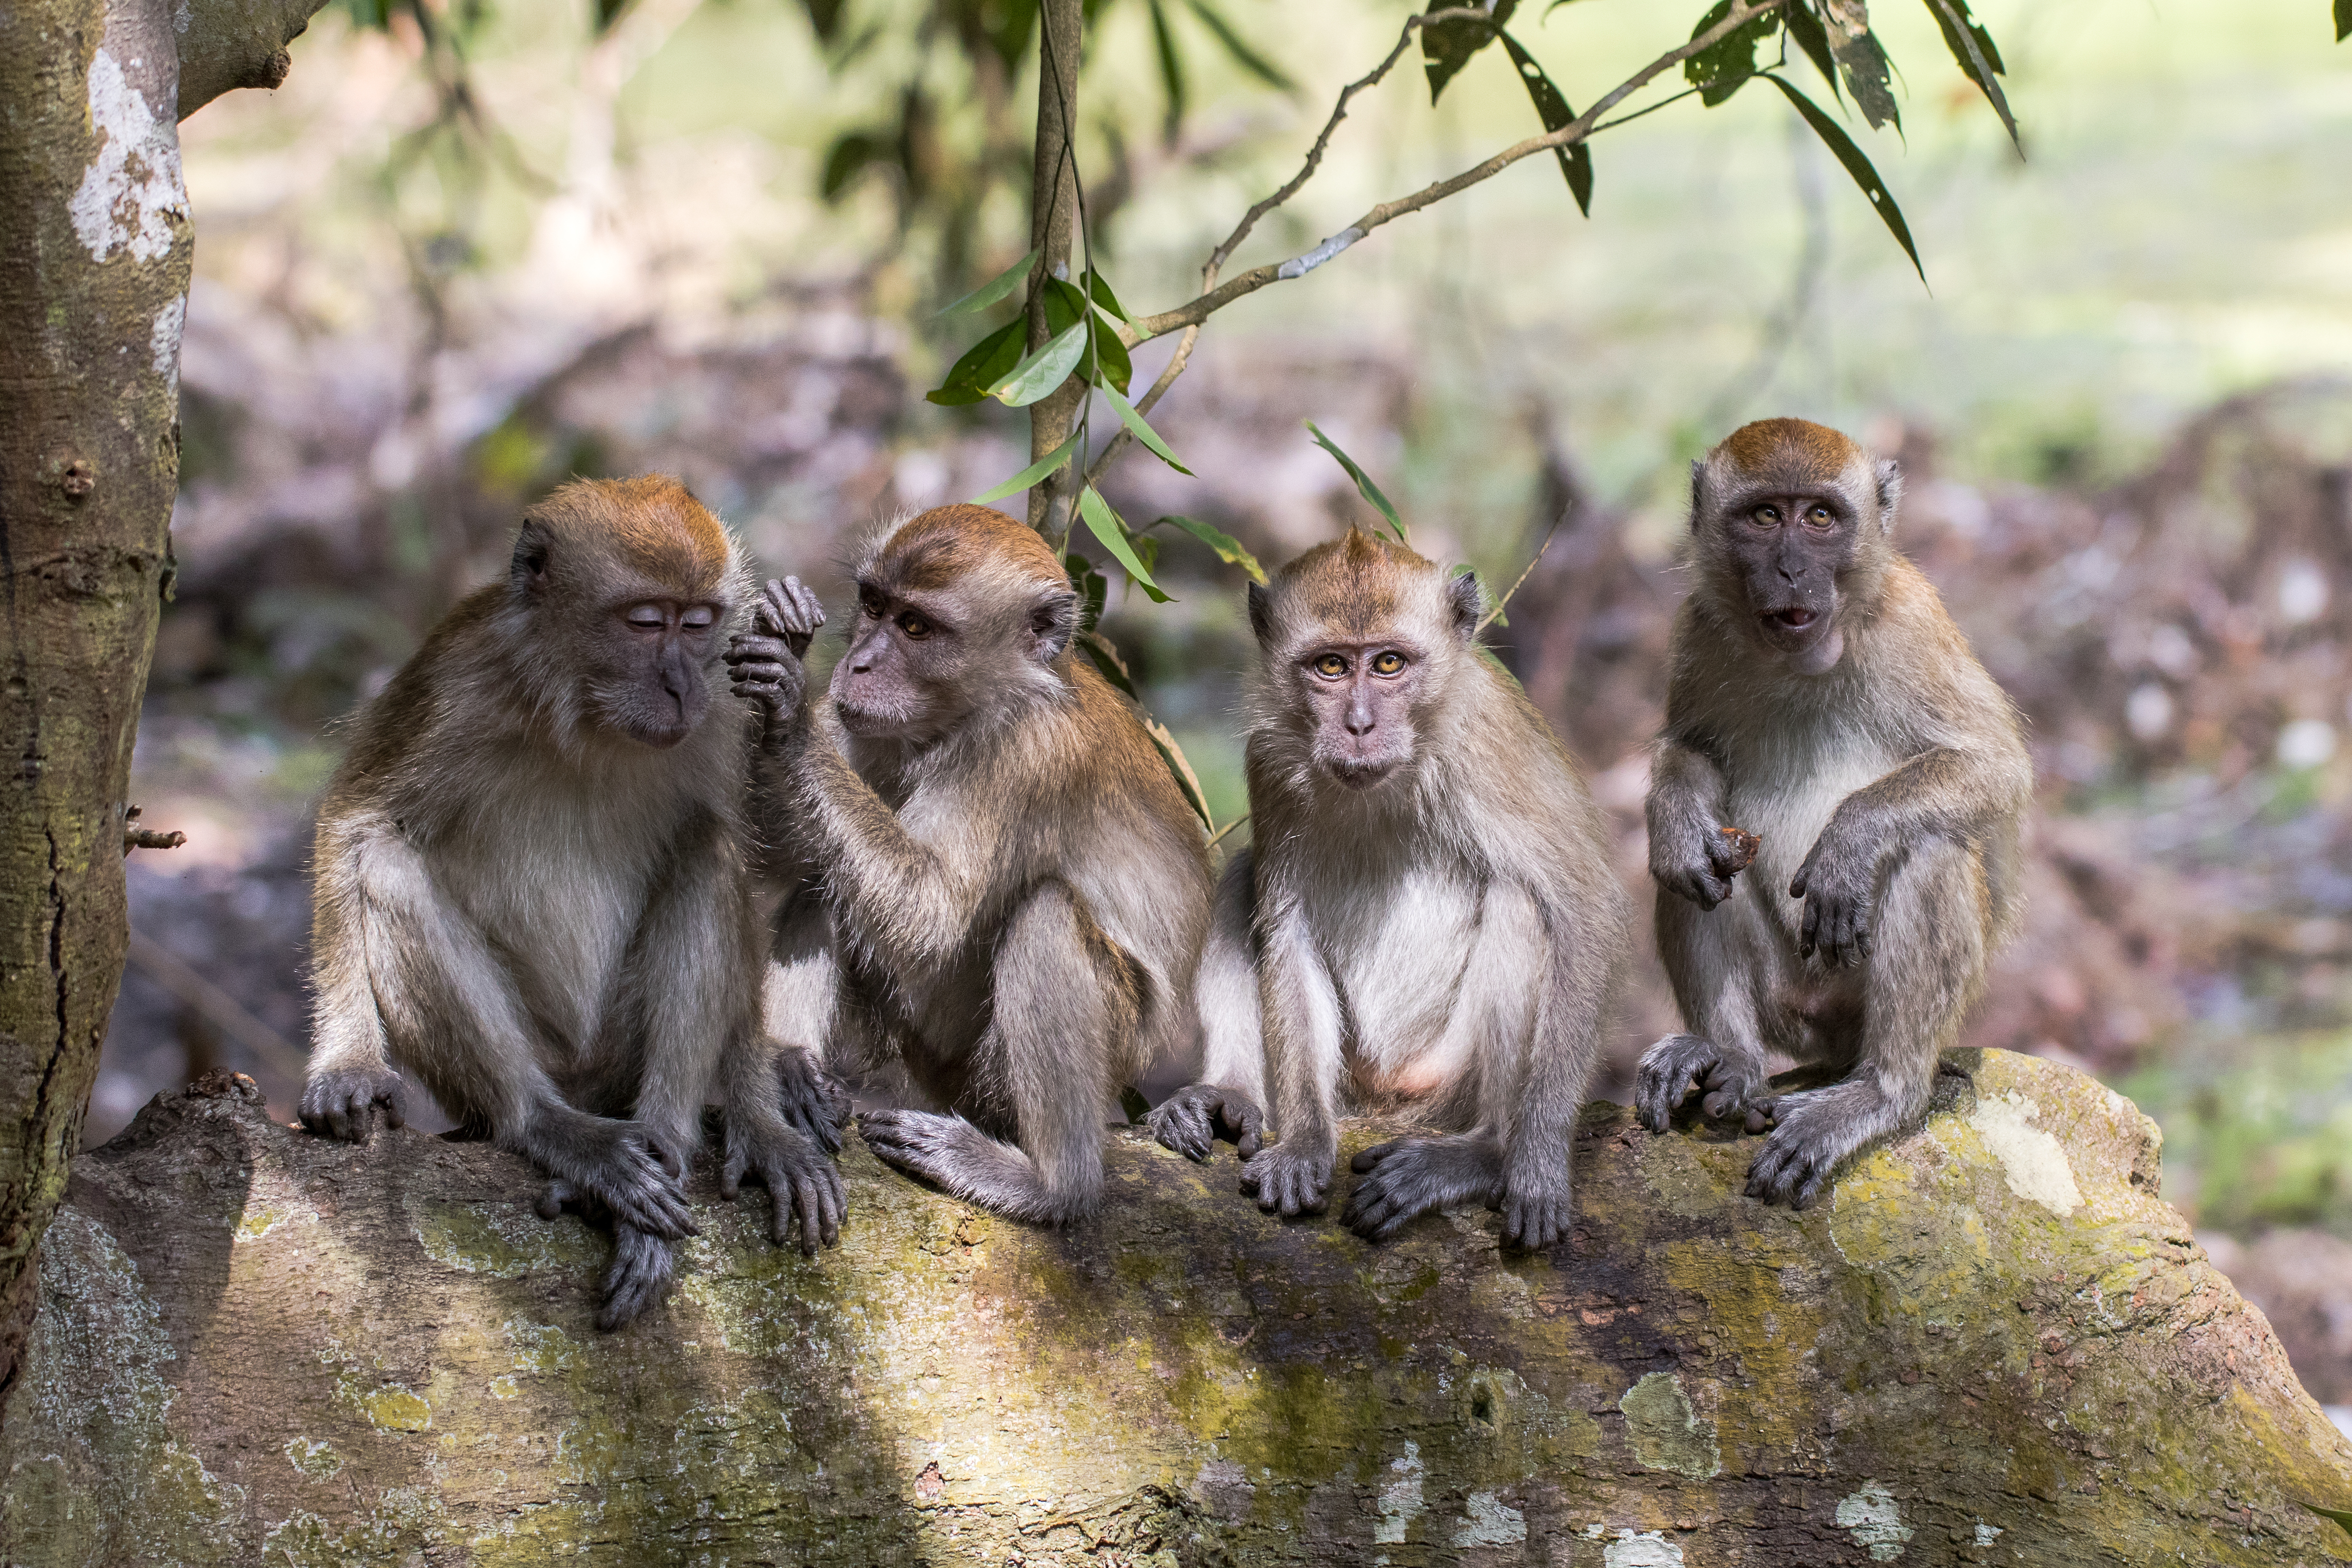 8 Charged in Scheme to Smuggle Endangered Monkeys From Asia, U.S.